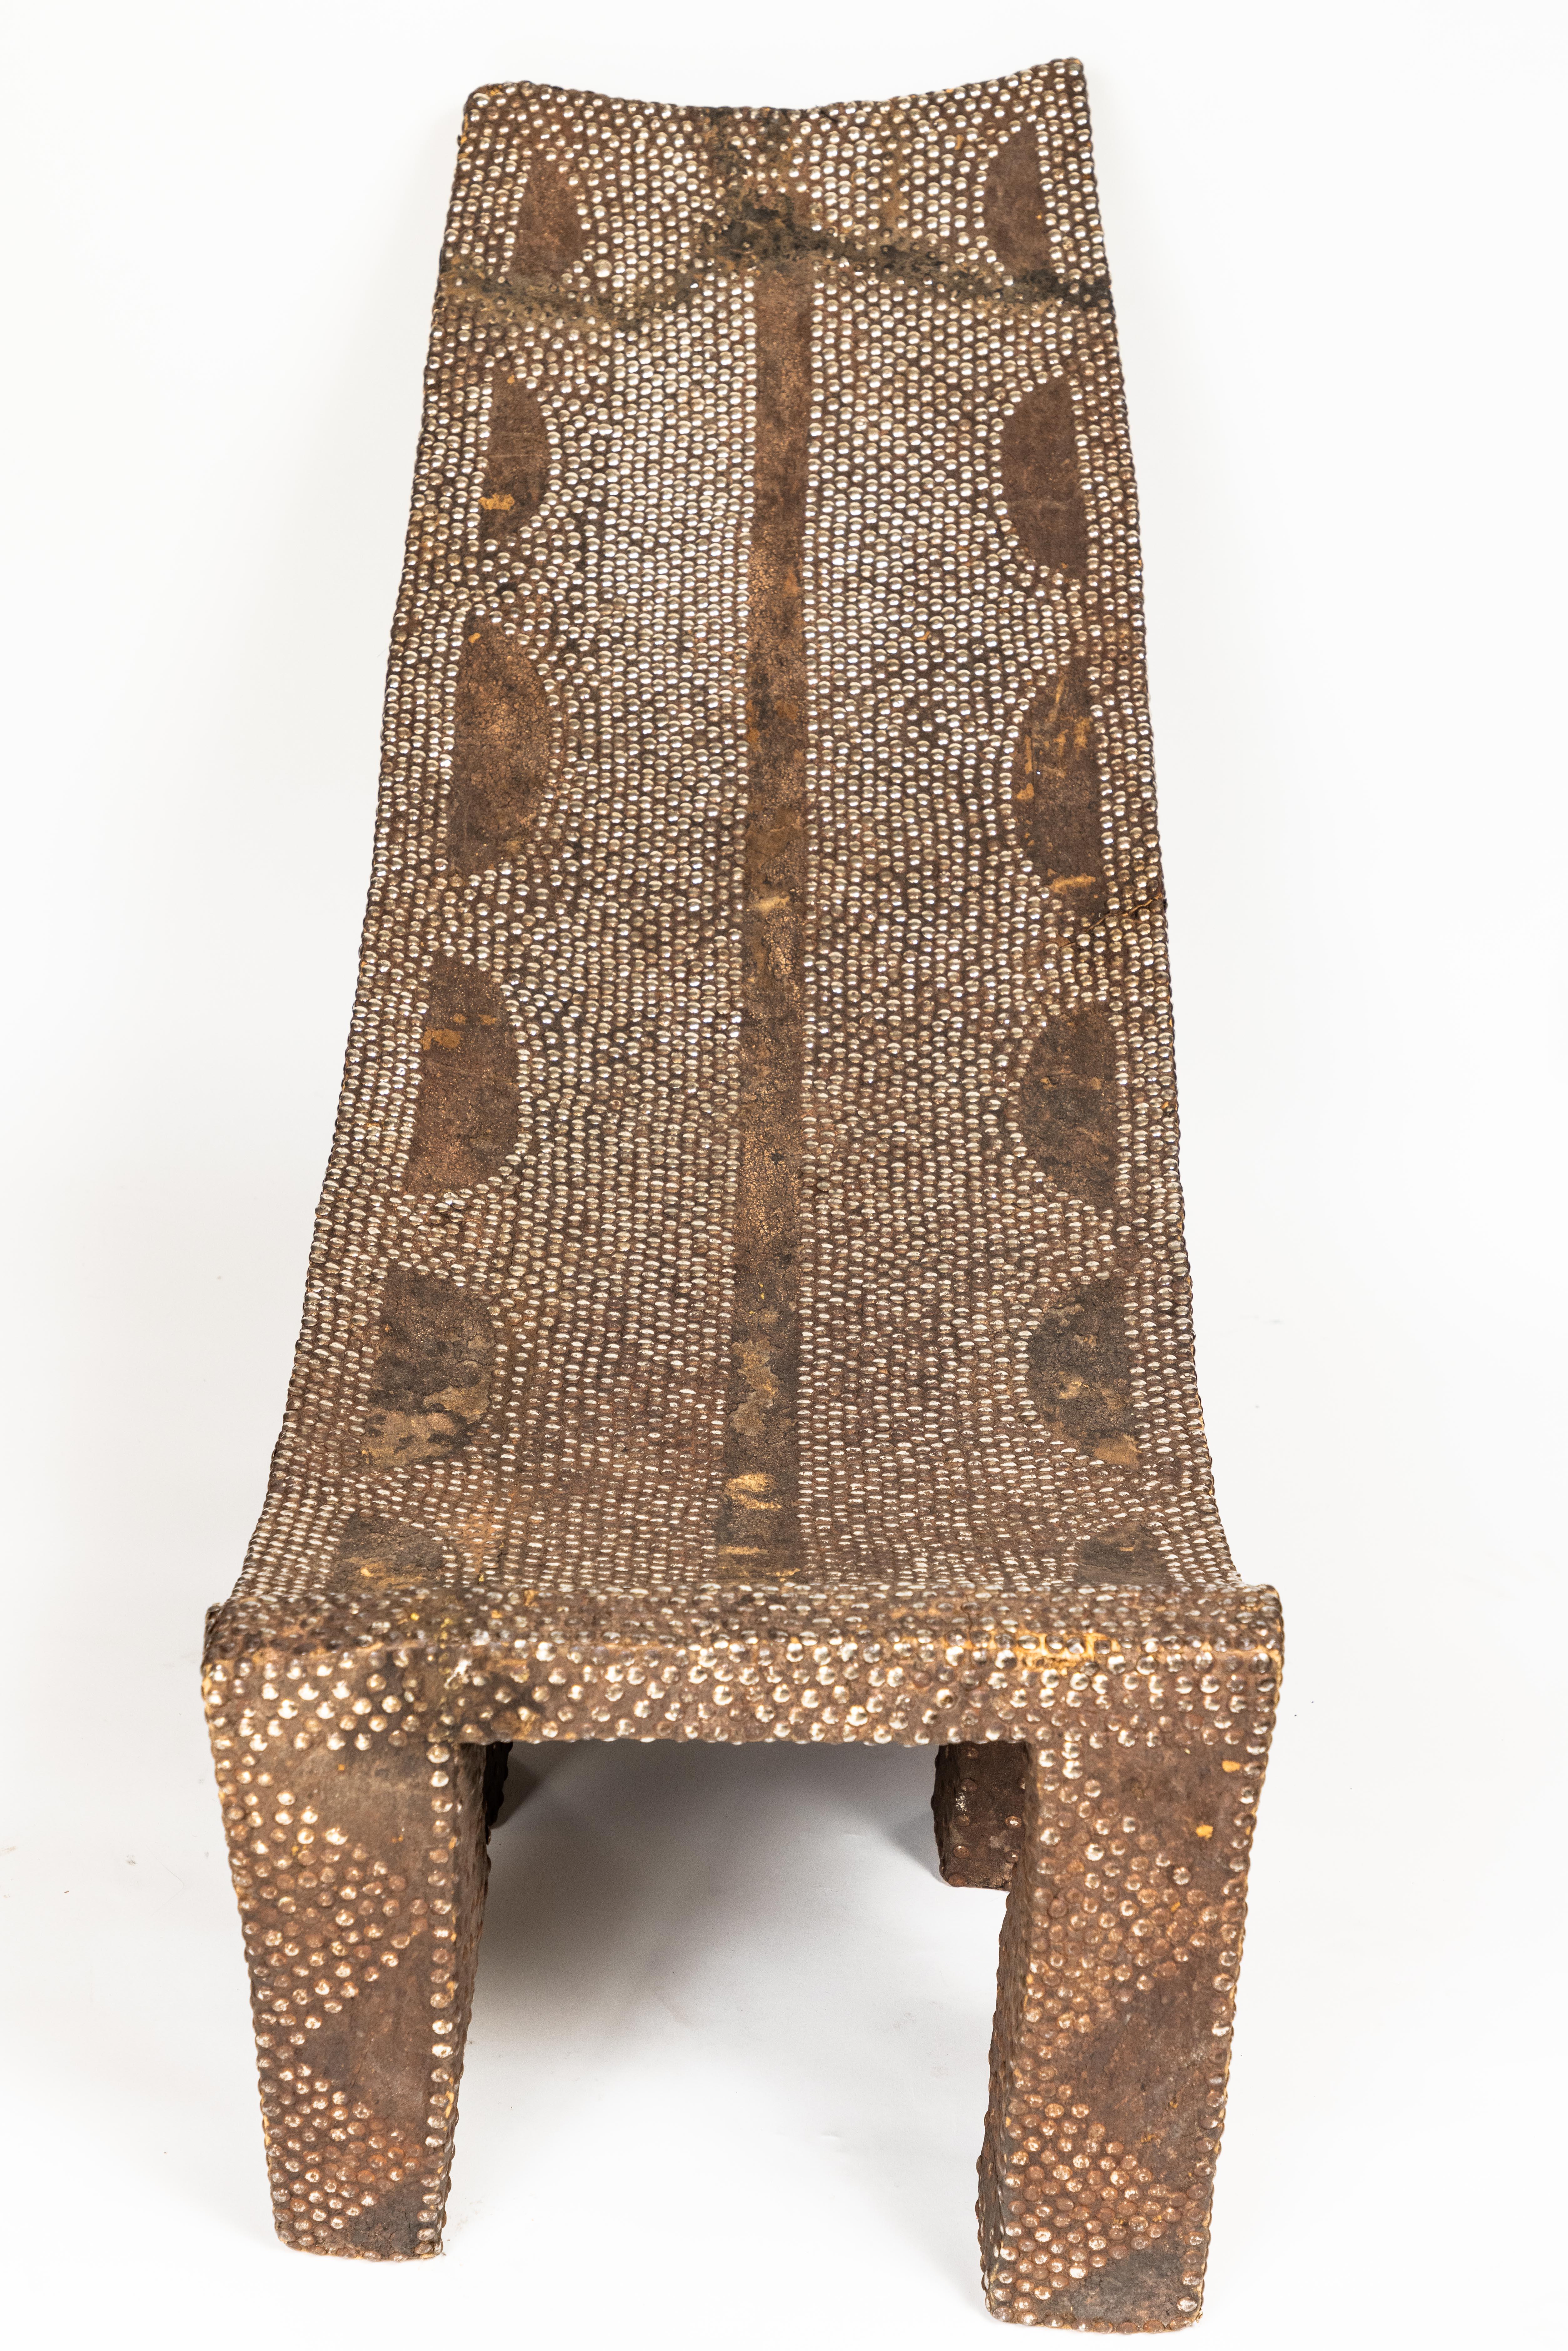 Vintage African Studded Wood Reclining Chair 2